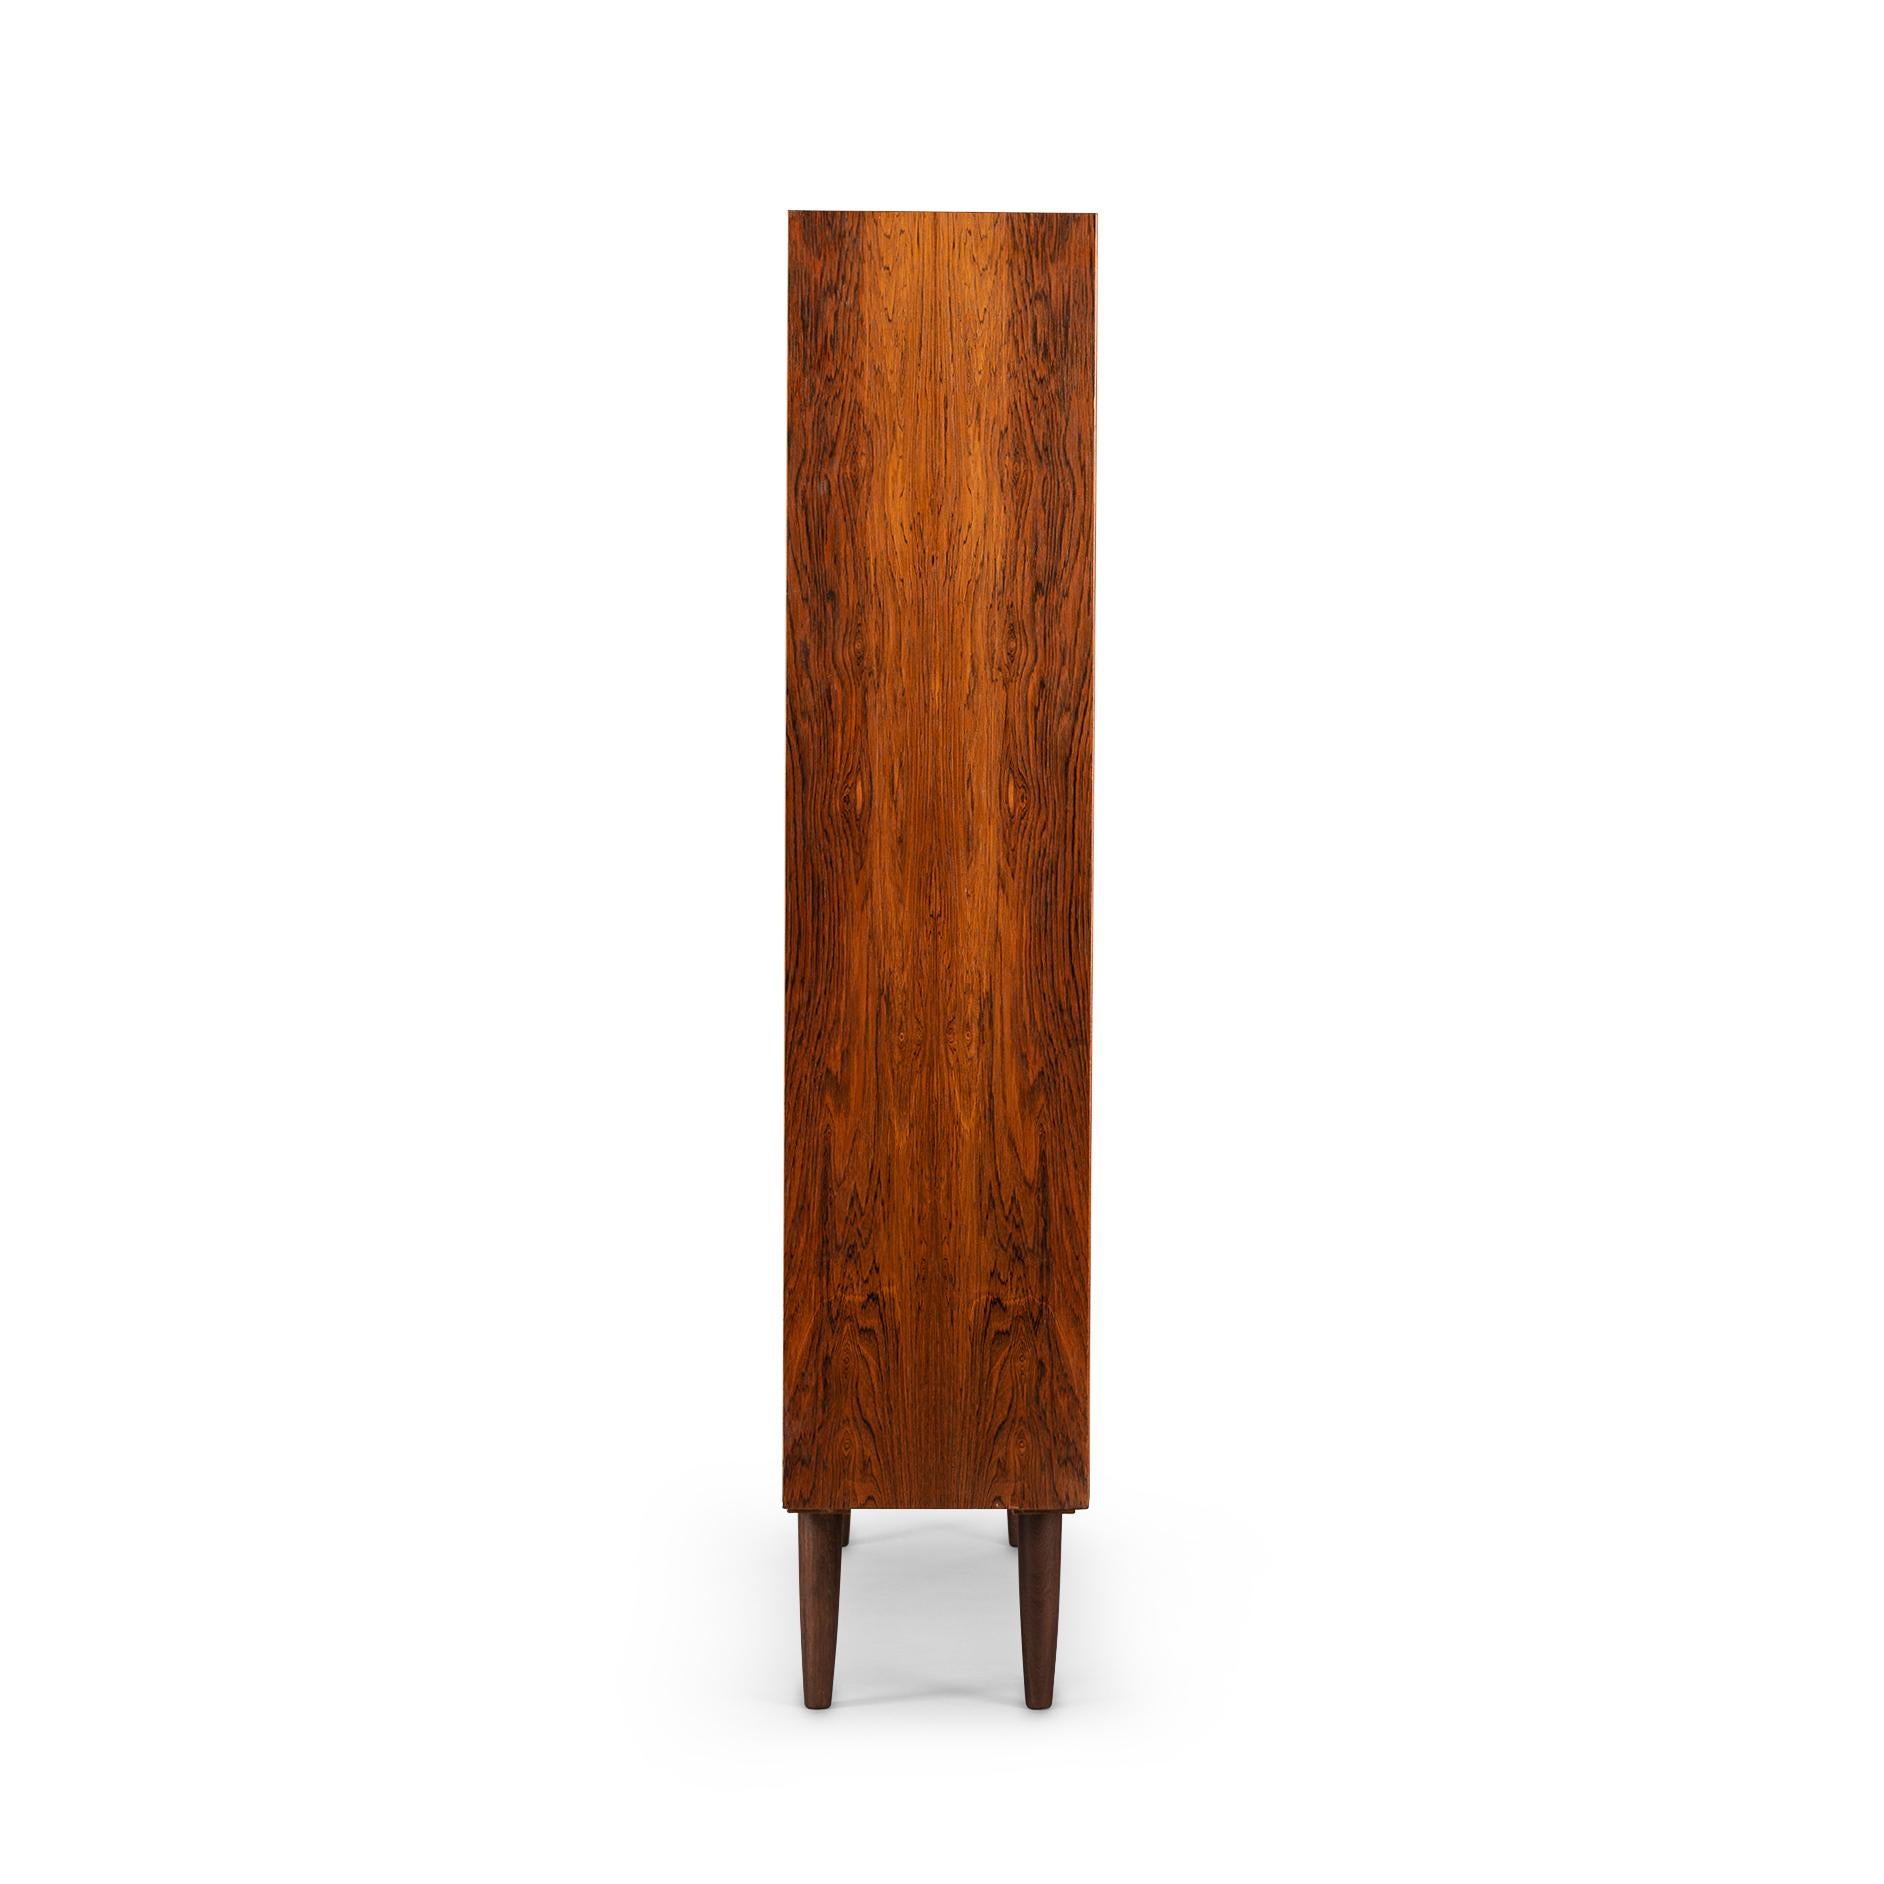 Danish tall bookcase in beautiful hardwood veneer. Designed by Carlo Jensen and made by Hundevad & Co. This bookcase is in very good vintage condition and has a total of 7 height-adjustable shelves.
  